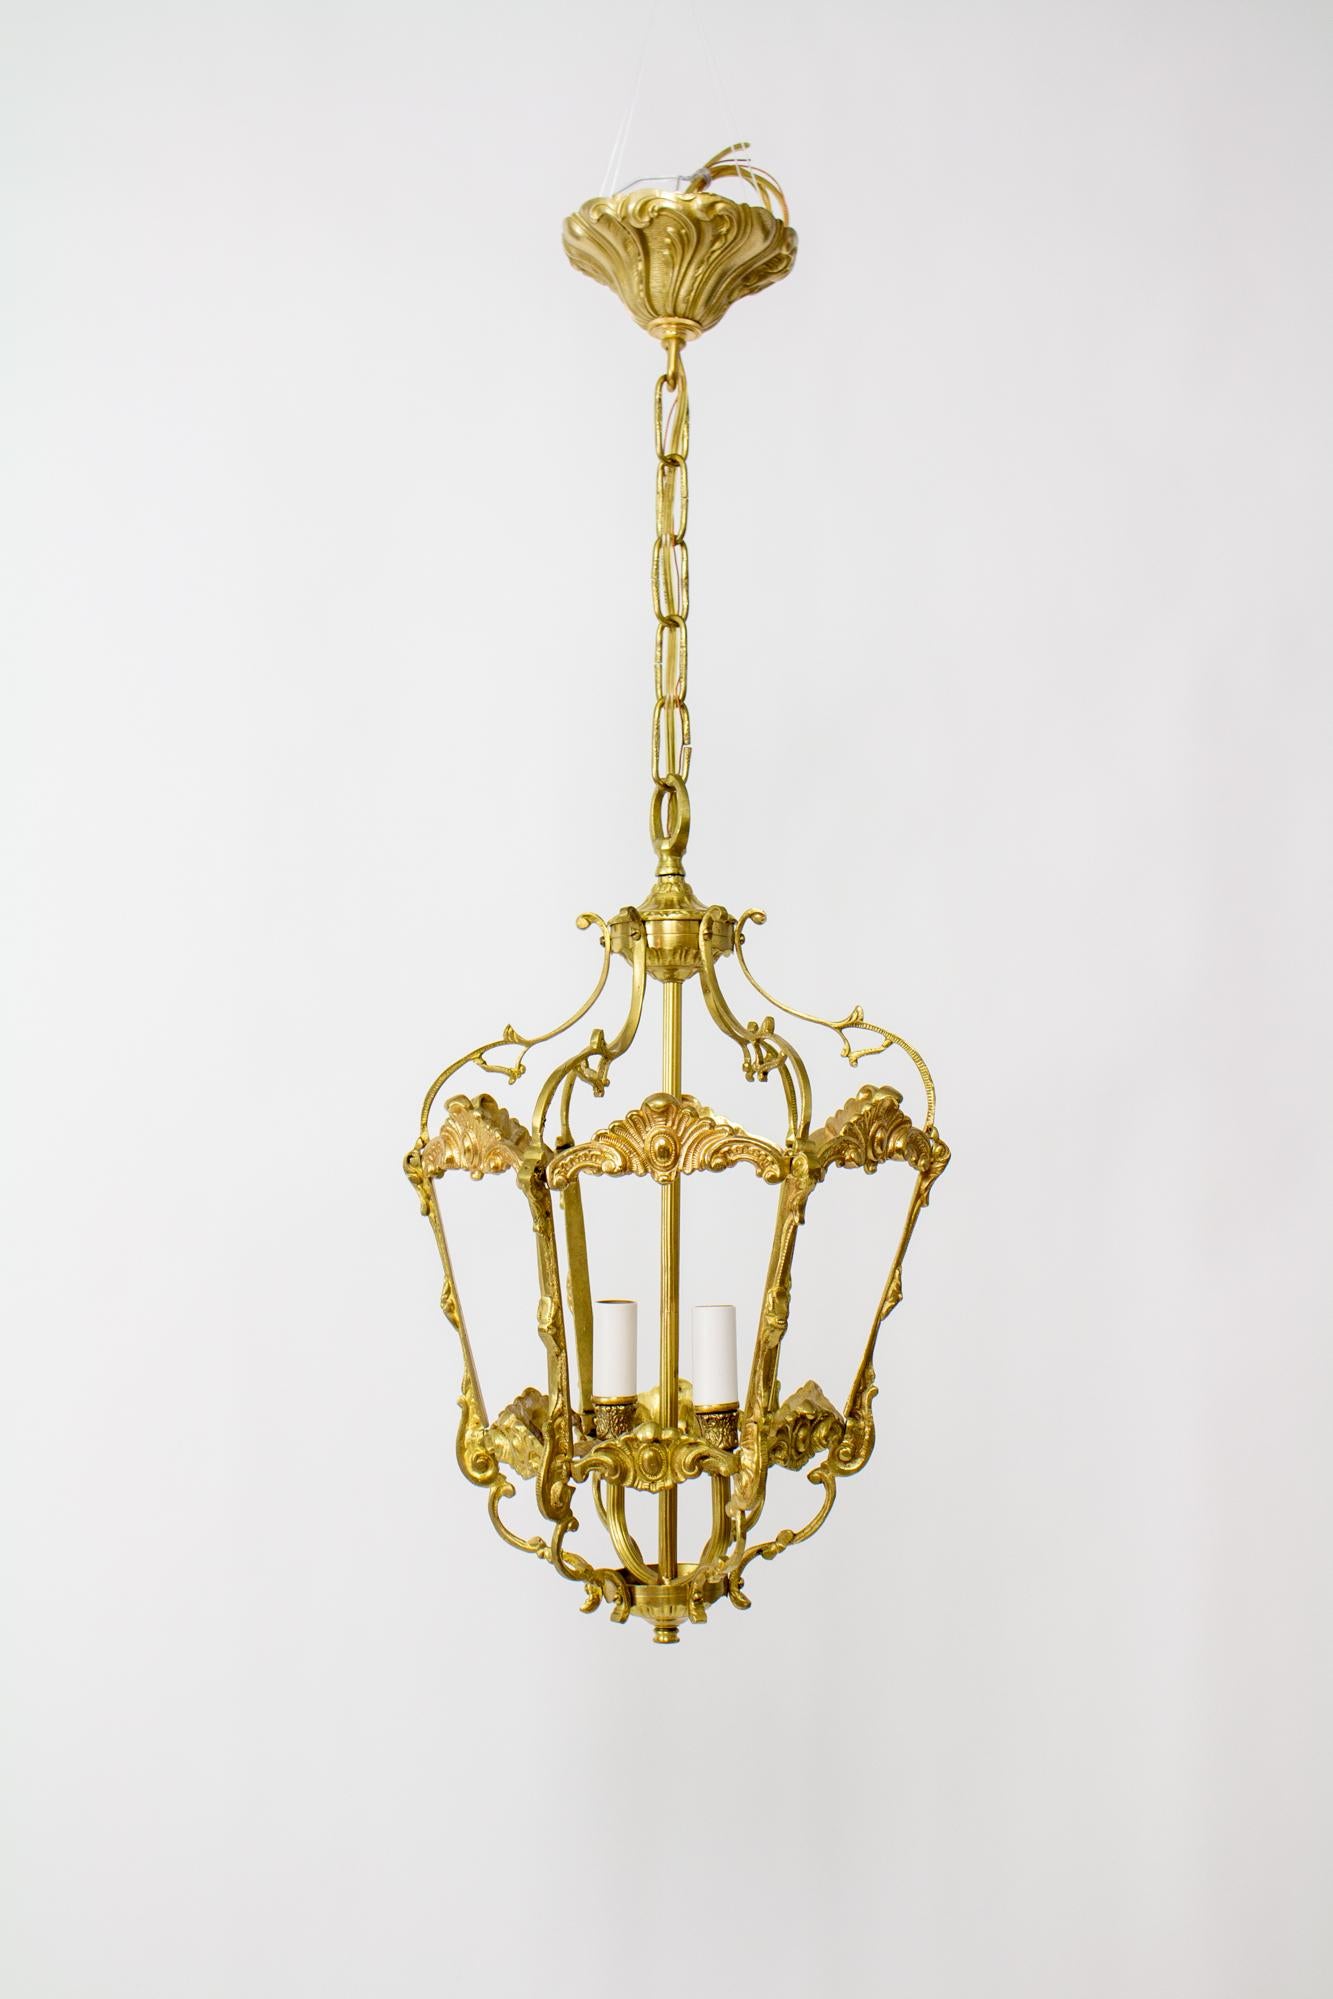 Early 20th Century Spanish Cast Brass Lantern For Sale 2